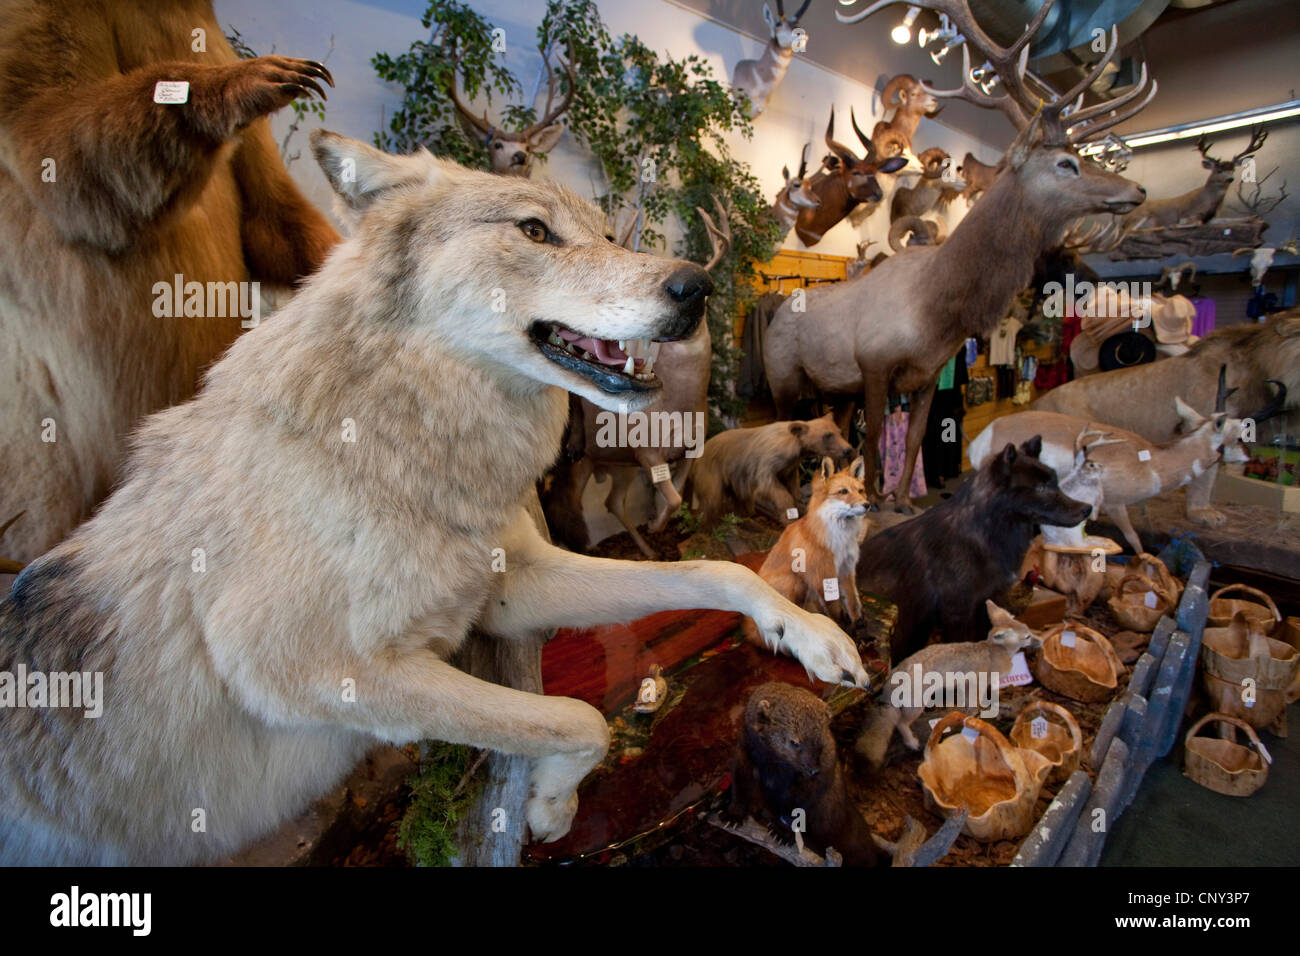 timber wolf (Canis lupus lycaon), Stuffed gray wolf as part of shop trophy animal selection, USA, Wyoming, Grand Teton NP, Jackson Hole Stock Photo